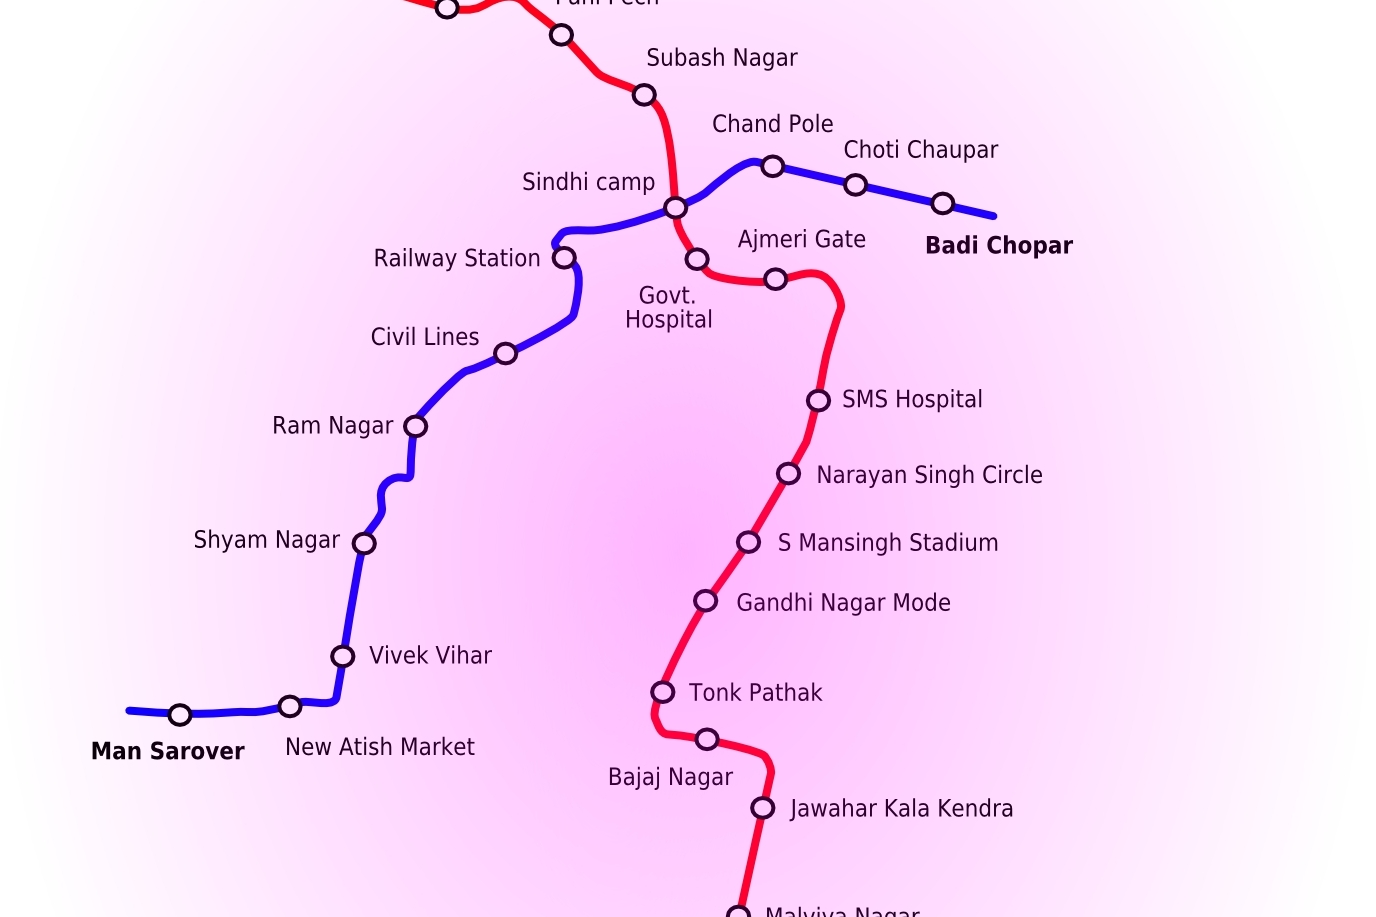 The Blue line of the Metro is functional . The Phase 2 will extend the blue line to Badi Chopar from the current last stop Chand Pole.